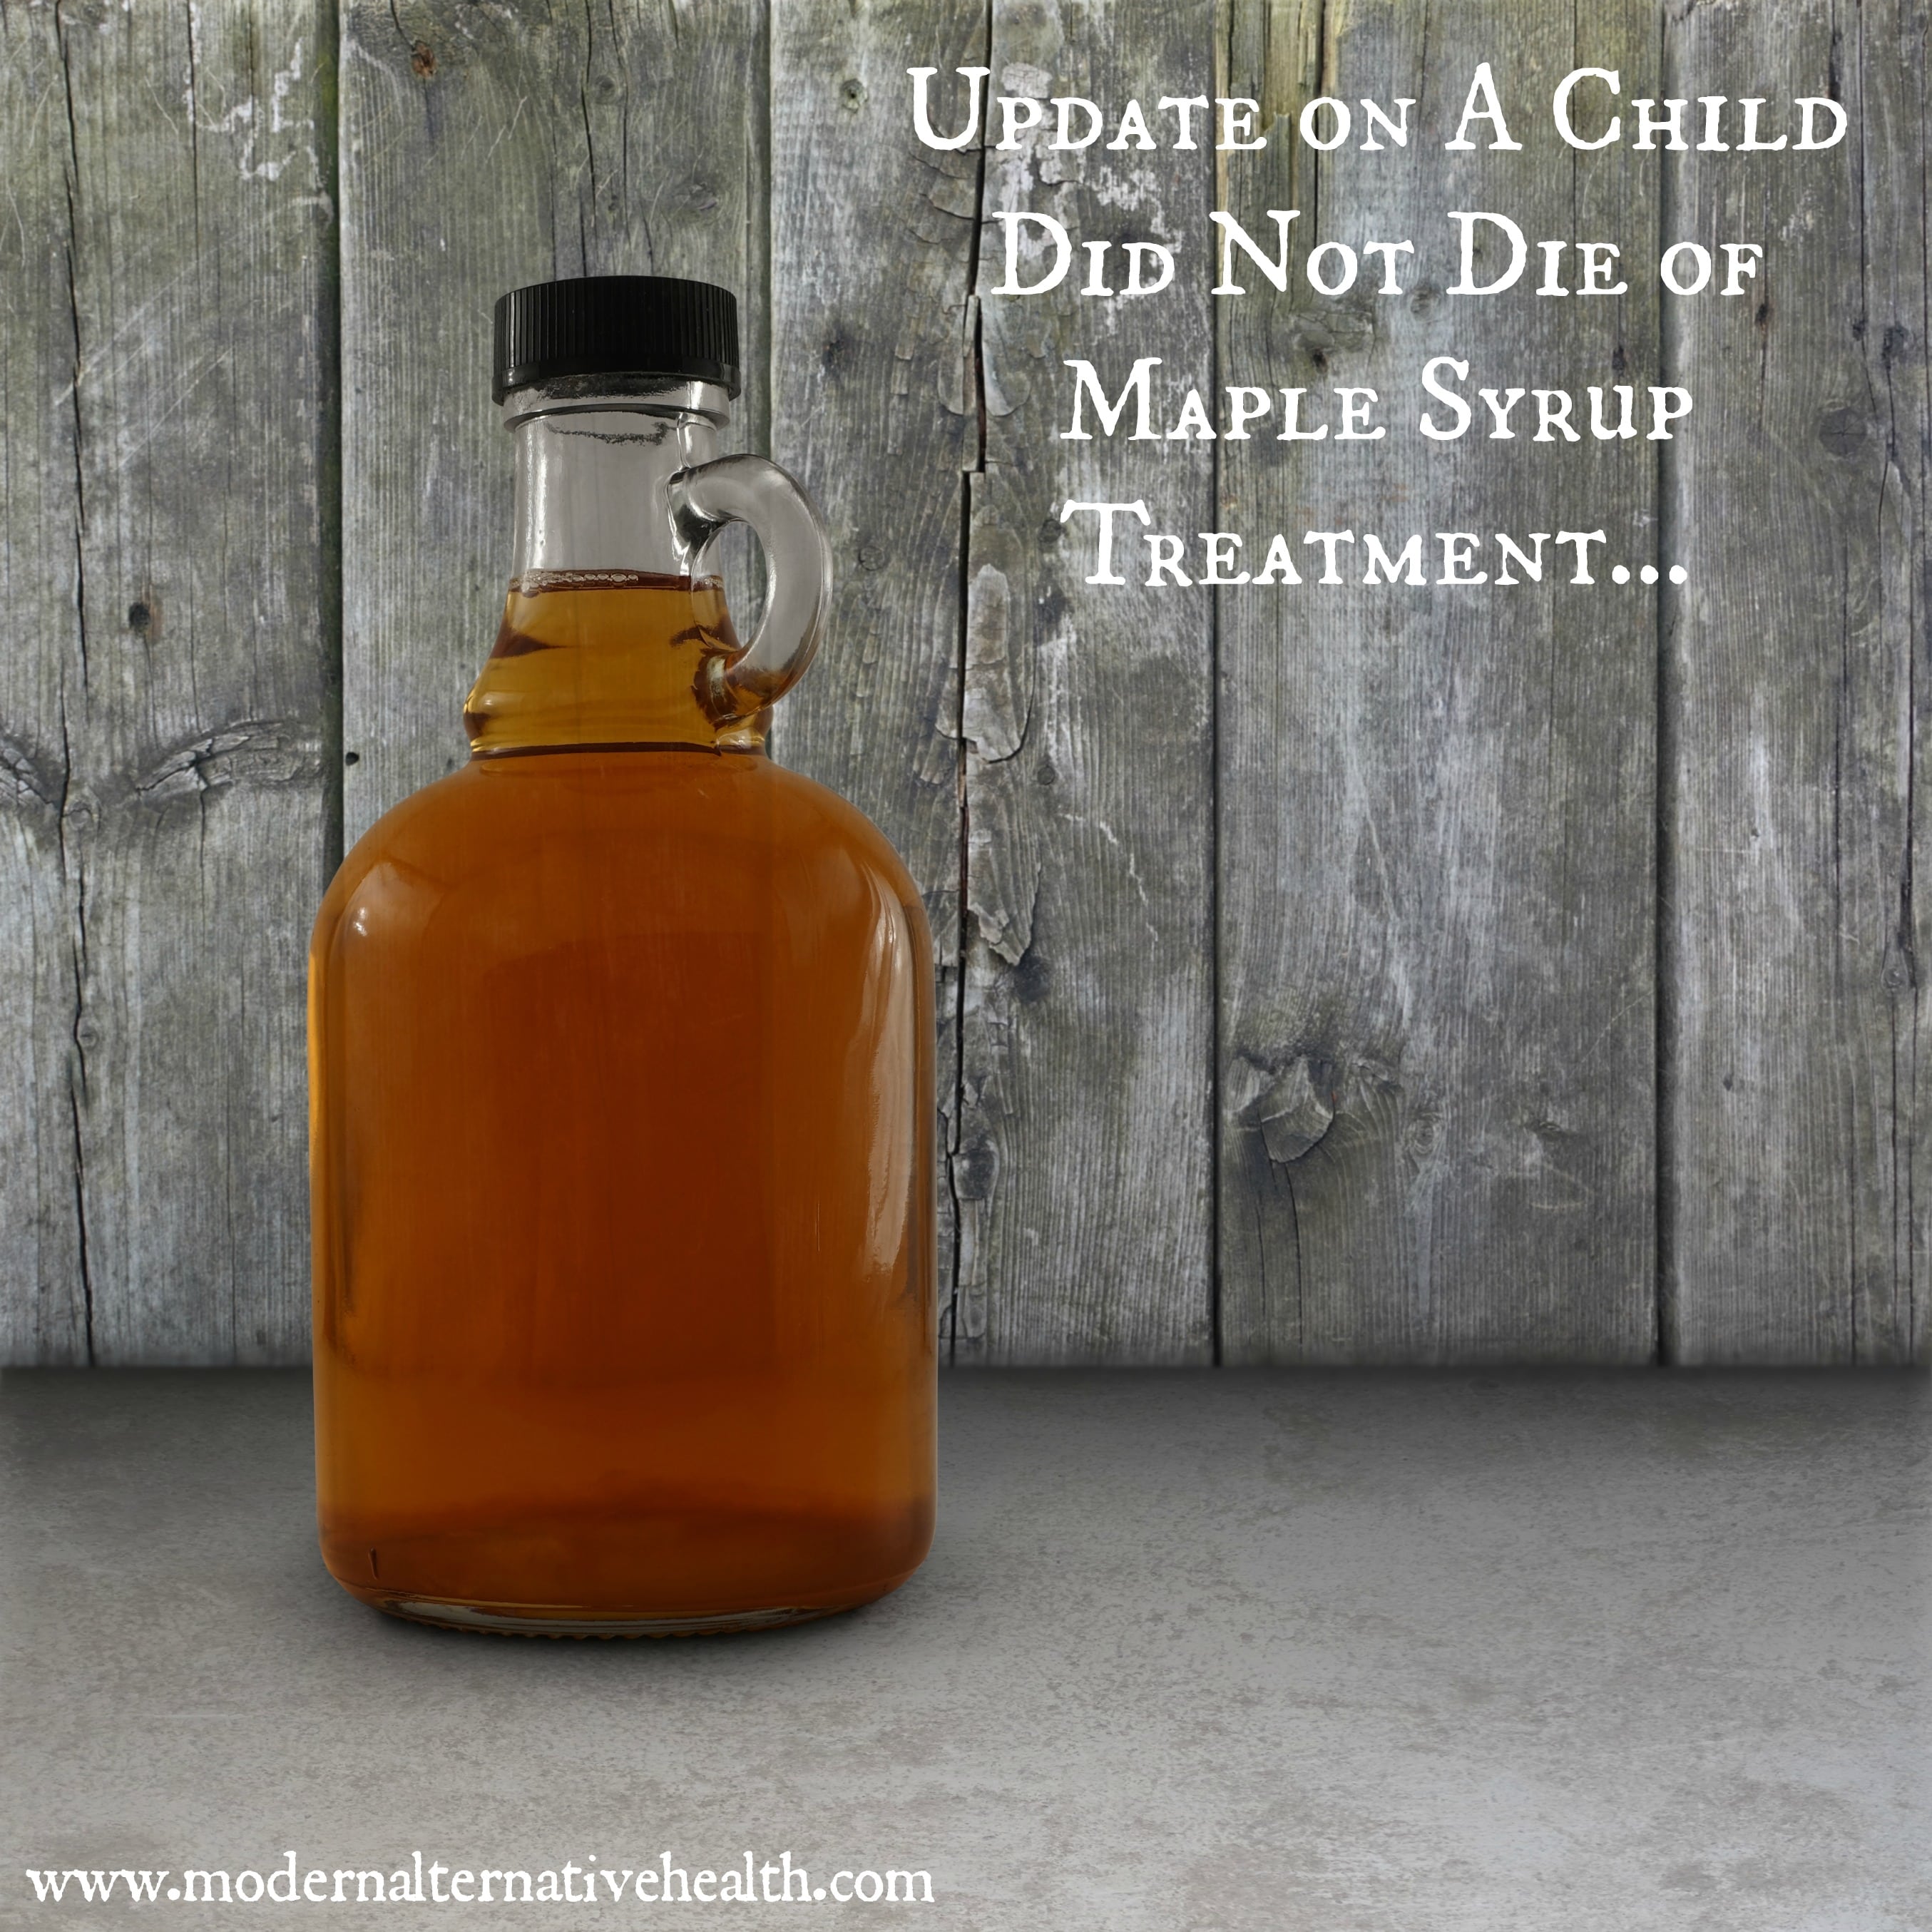 Update on A Child Did Not Die of Maple Syrup Treatment